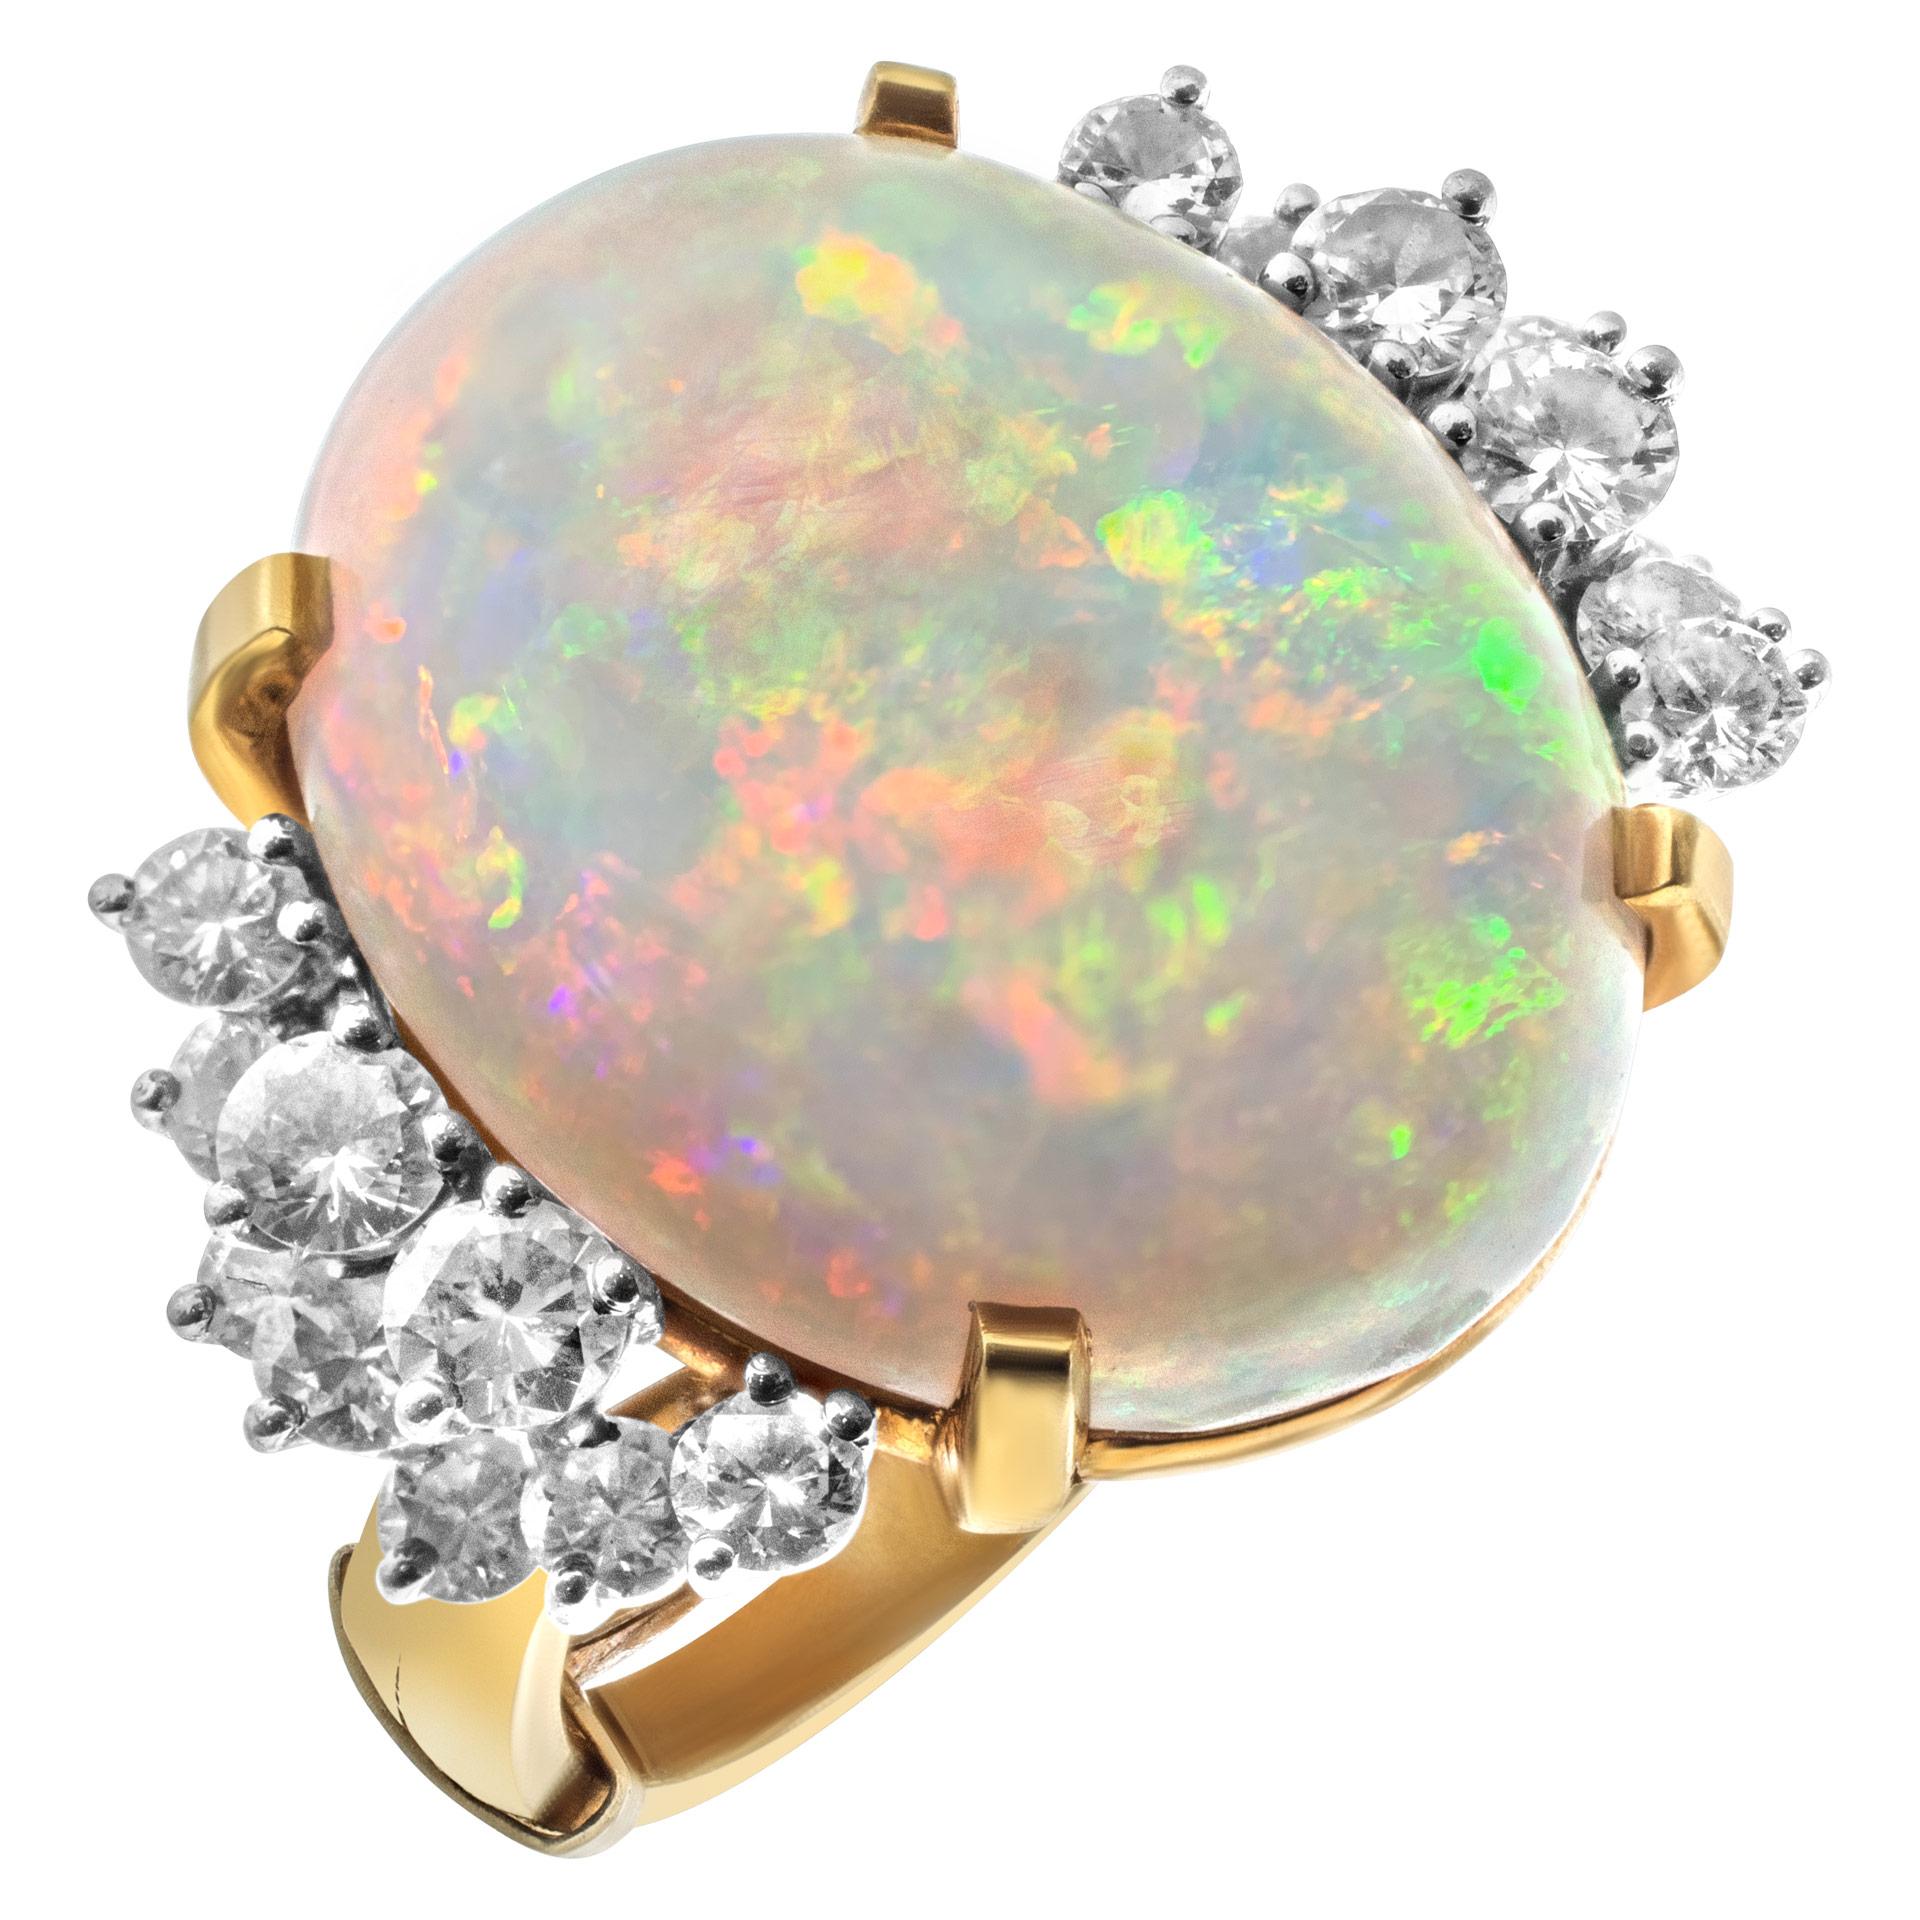 Modernist Australian Opal and Diamond Ring Set in 18k White and Yellow Gold